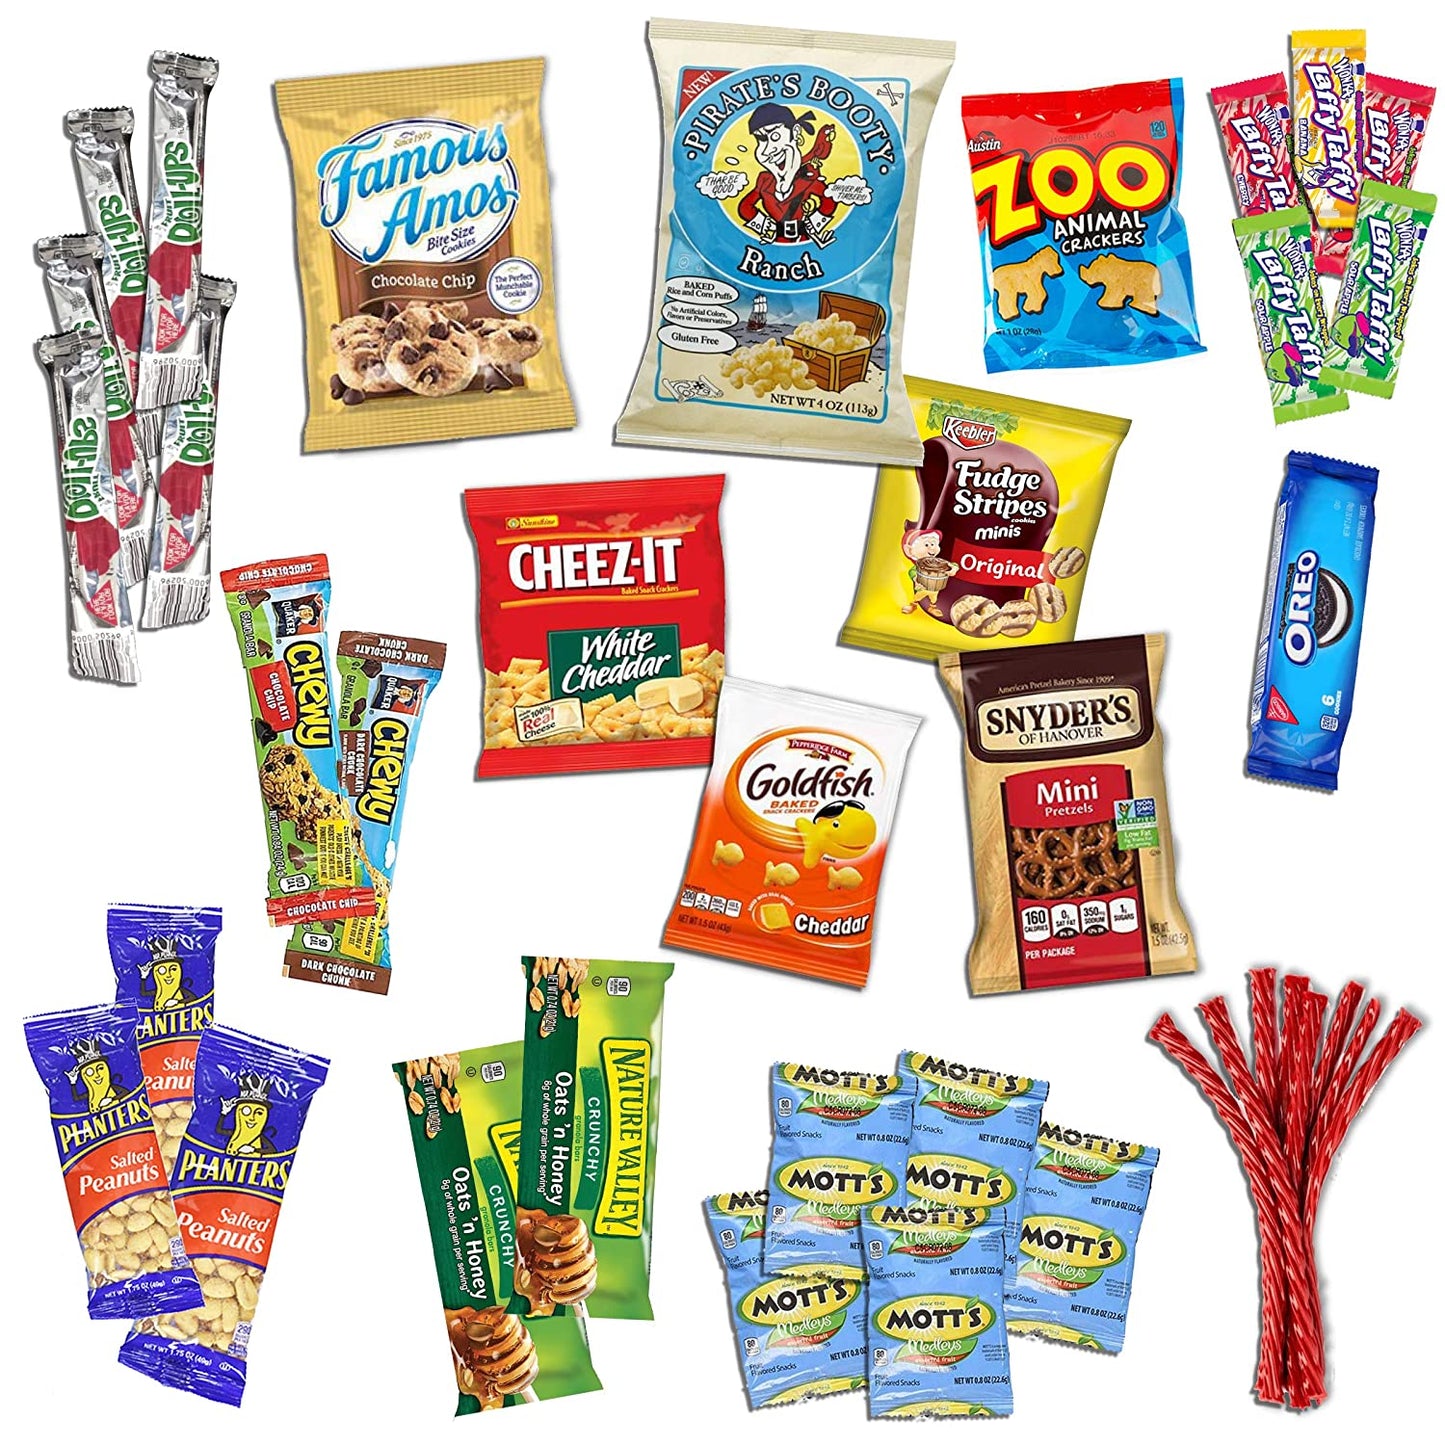 Halloween Package (38) Candy Snacks Assortment Trick or Treat Cookies Food Bars Toys Variety Gift Pack Box Bundle Mixed Bulk Sampler for Children Kids Boys Girls College Students